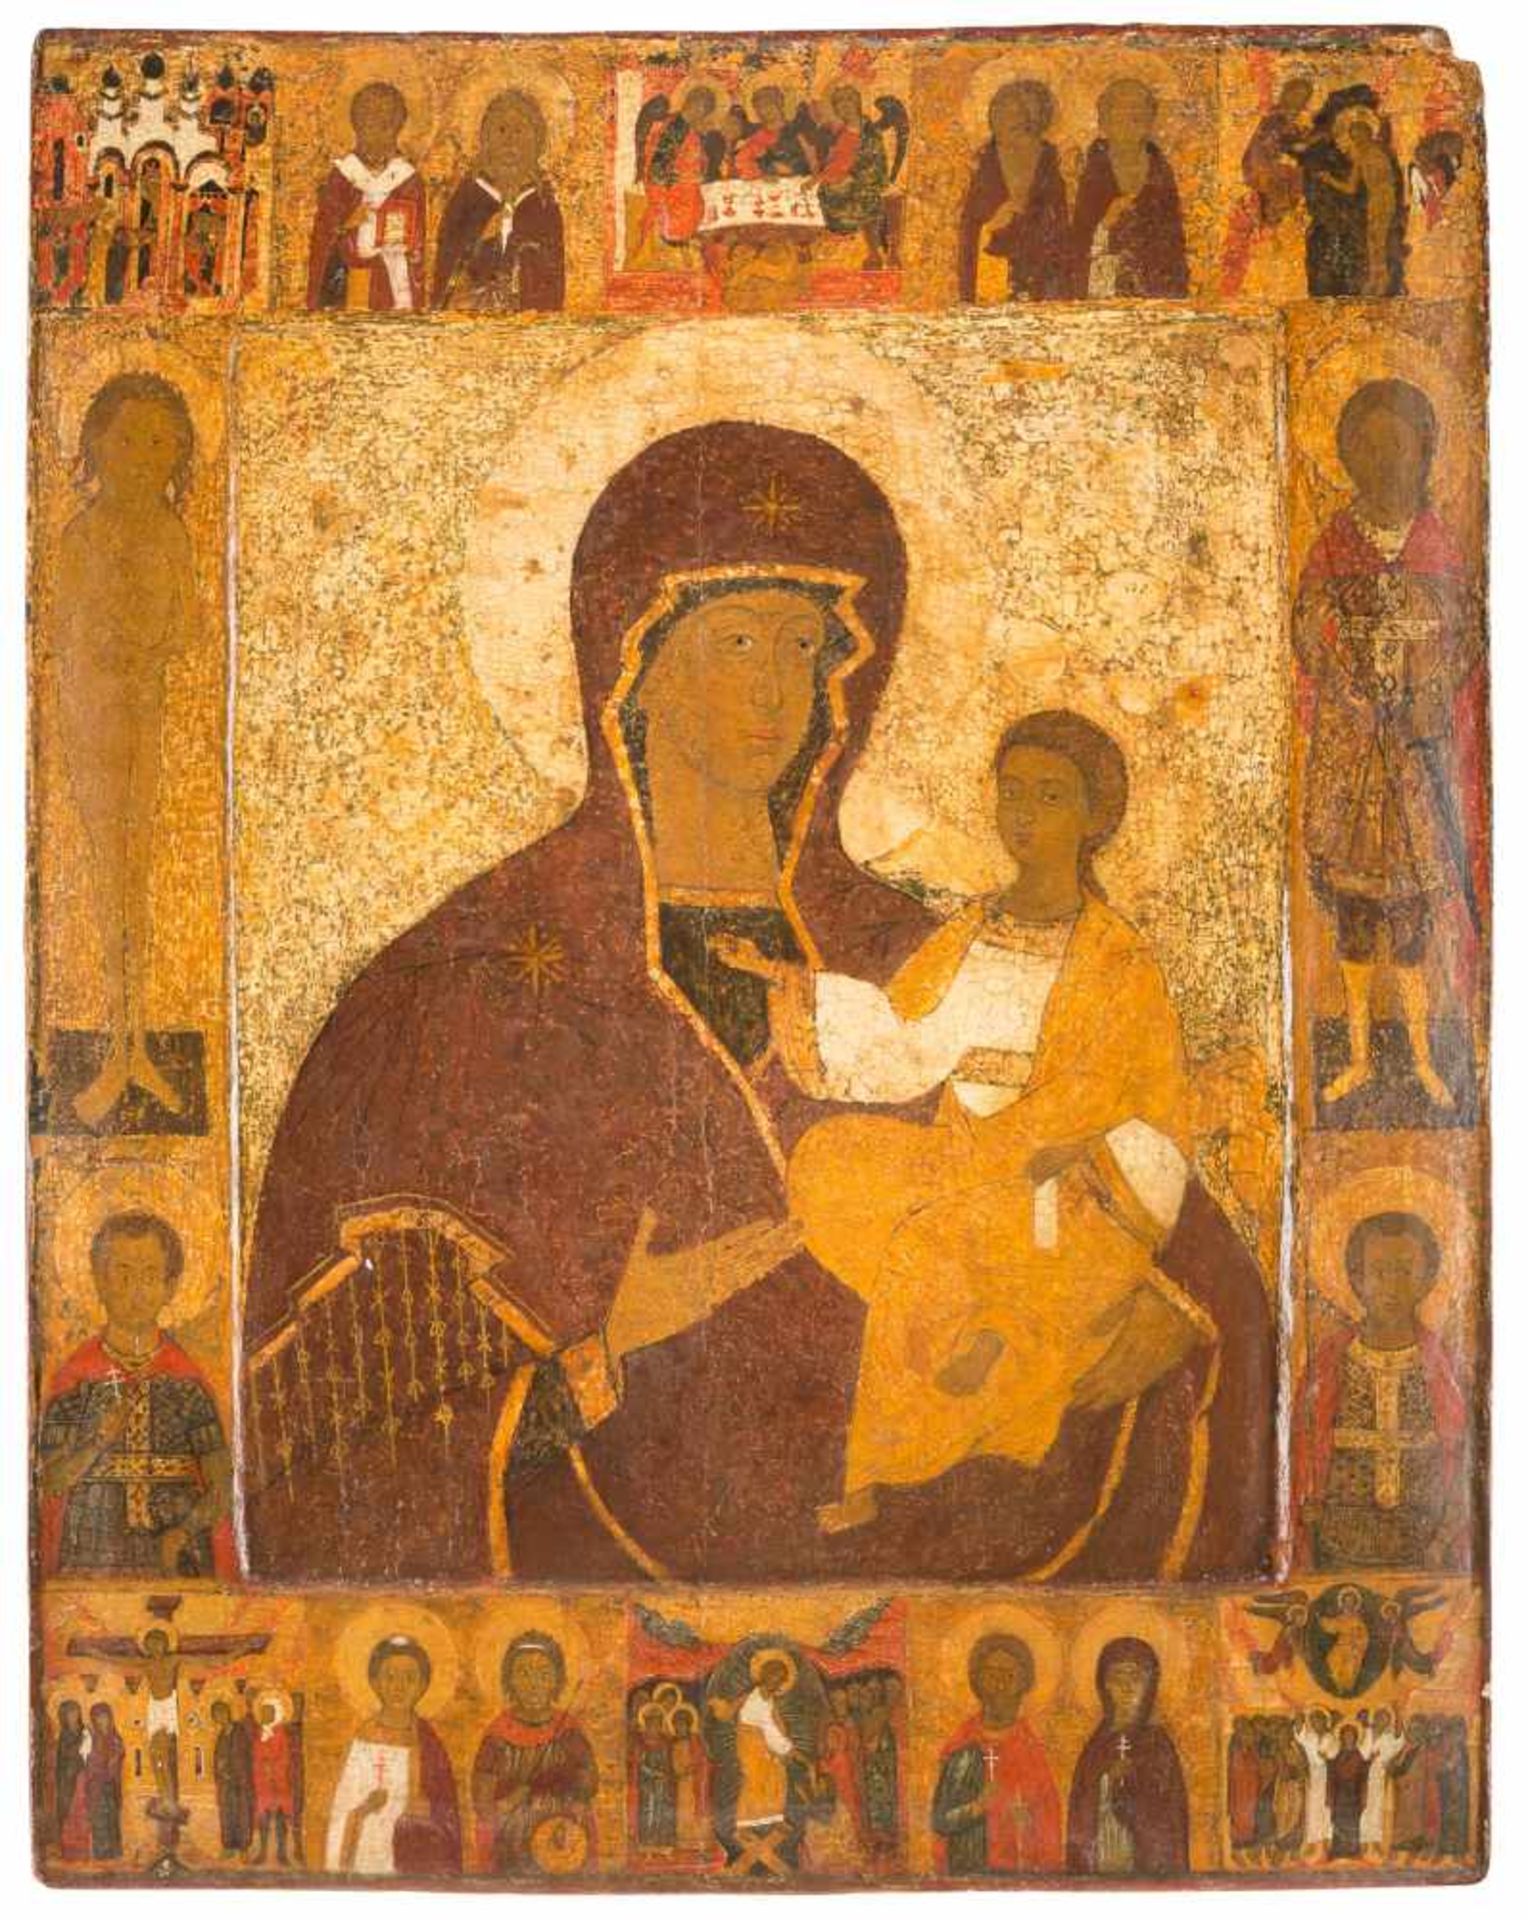 A MONUMENTAL ICON SHOWING THE MOTHER OF GOD, MAIN LITURGICAL FEASTS AND SELECTED SAINTS